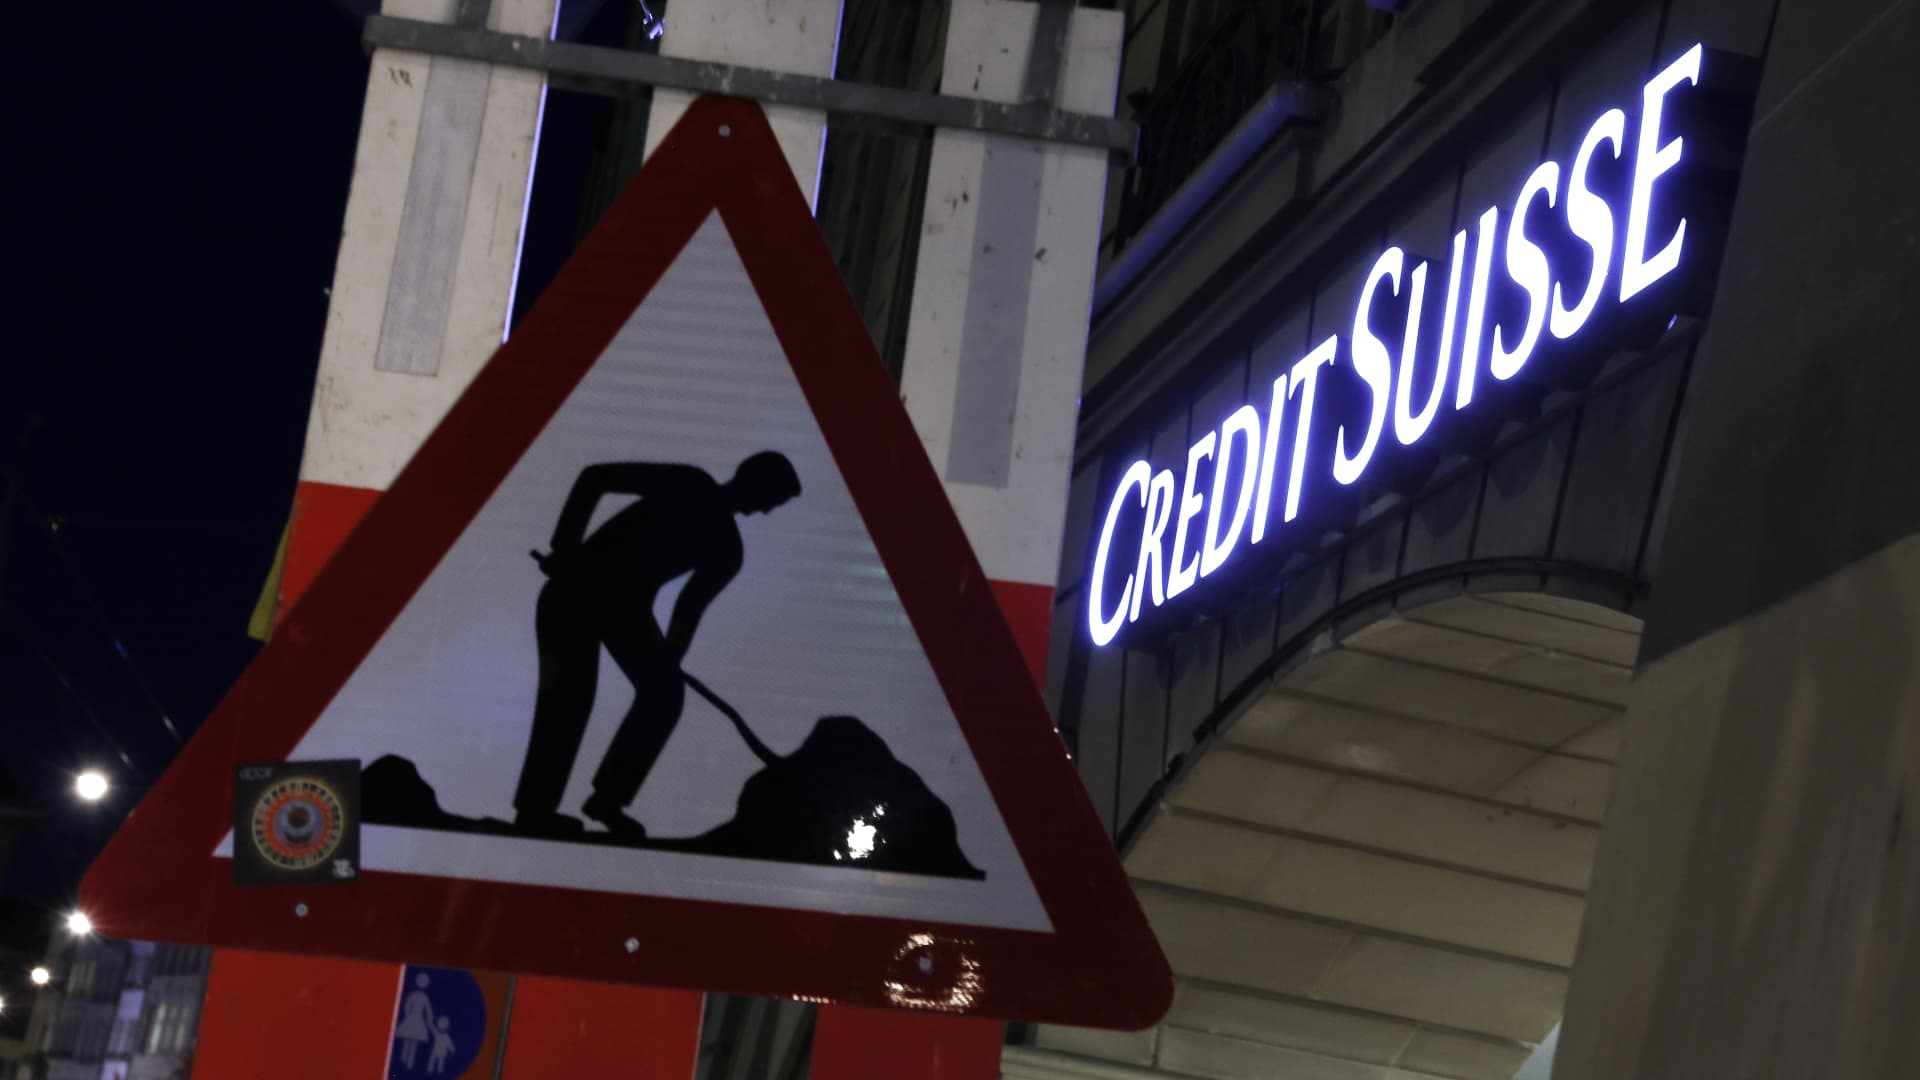 Credit Suisse sheds another 5% as traders digest emergency liquidity - CNBC